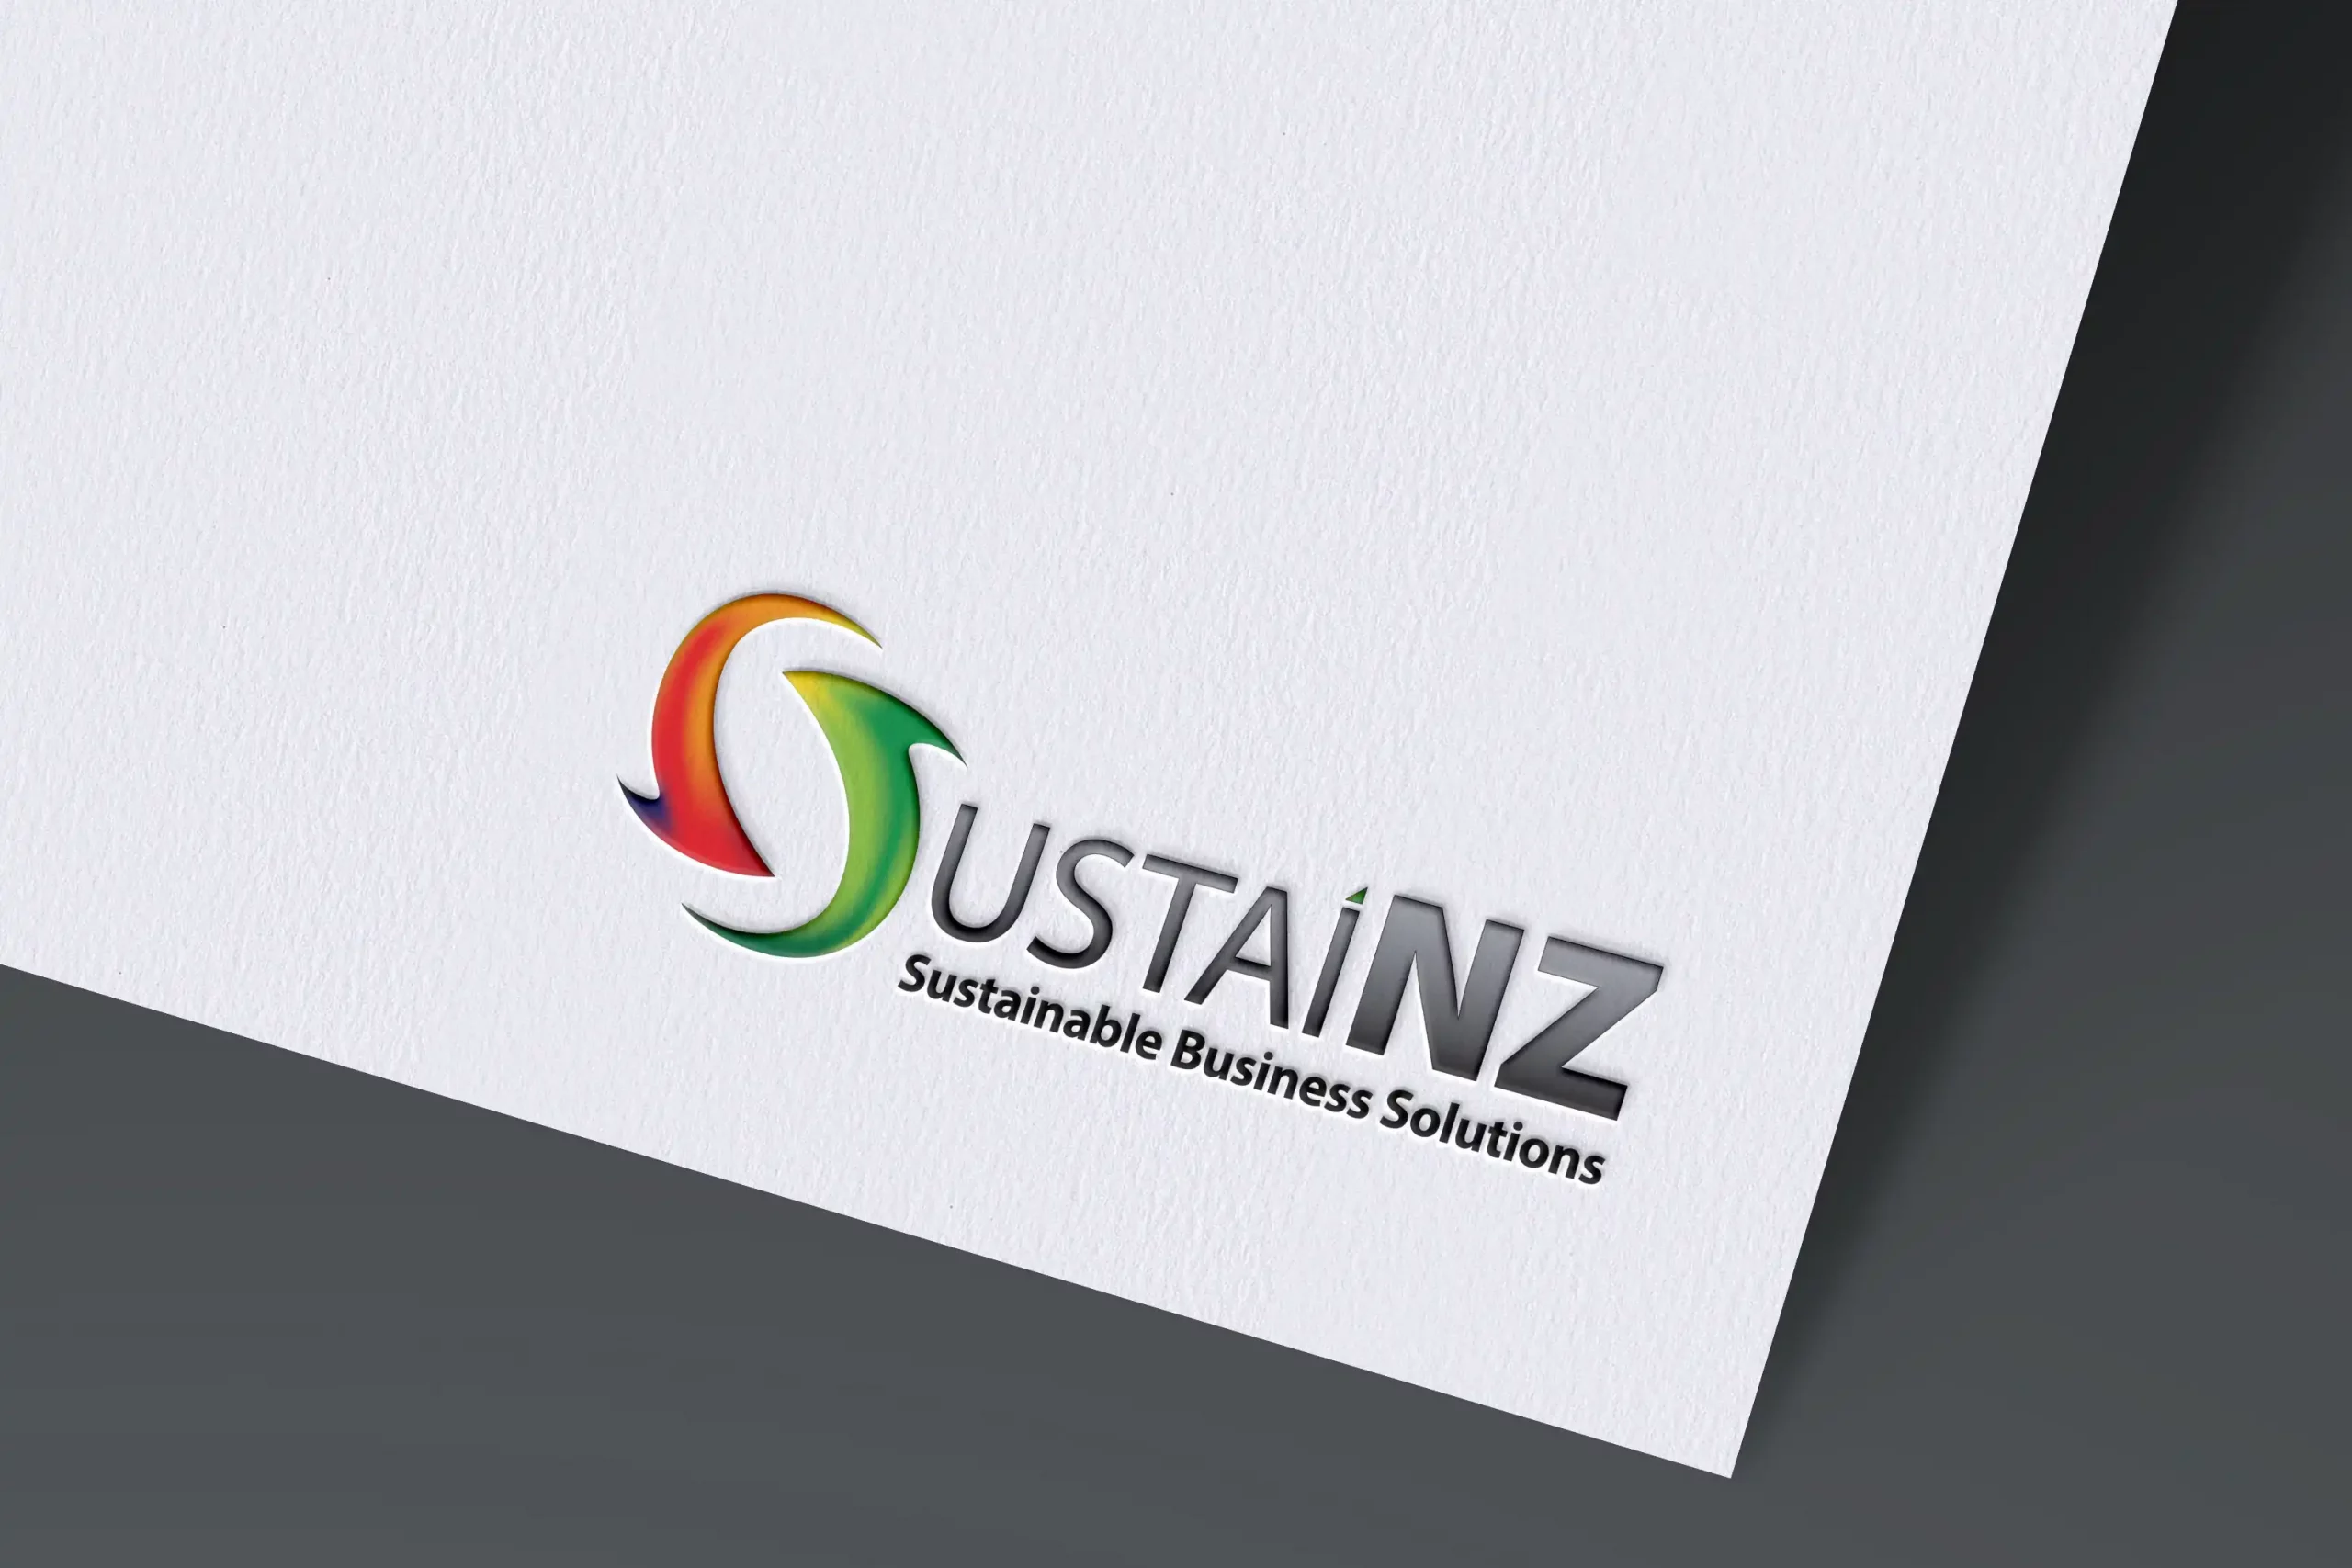 Logo Making made easy for Sustain NZ in Christchurch, Canterbury, NZ. An international style, eco-sustainable New Zealand type Logo Design made by XDC.NZ, the super experienced, professional, specialist Logo Designer based in Christchurch